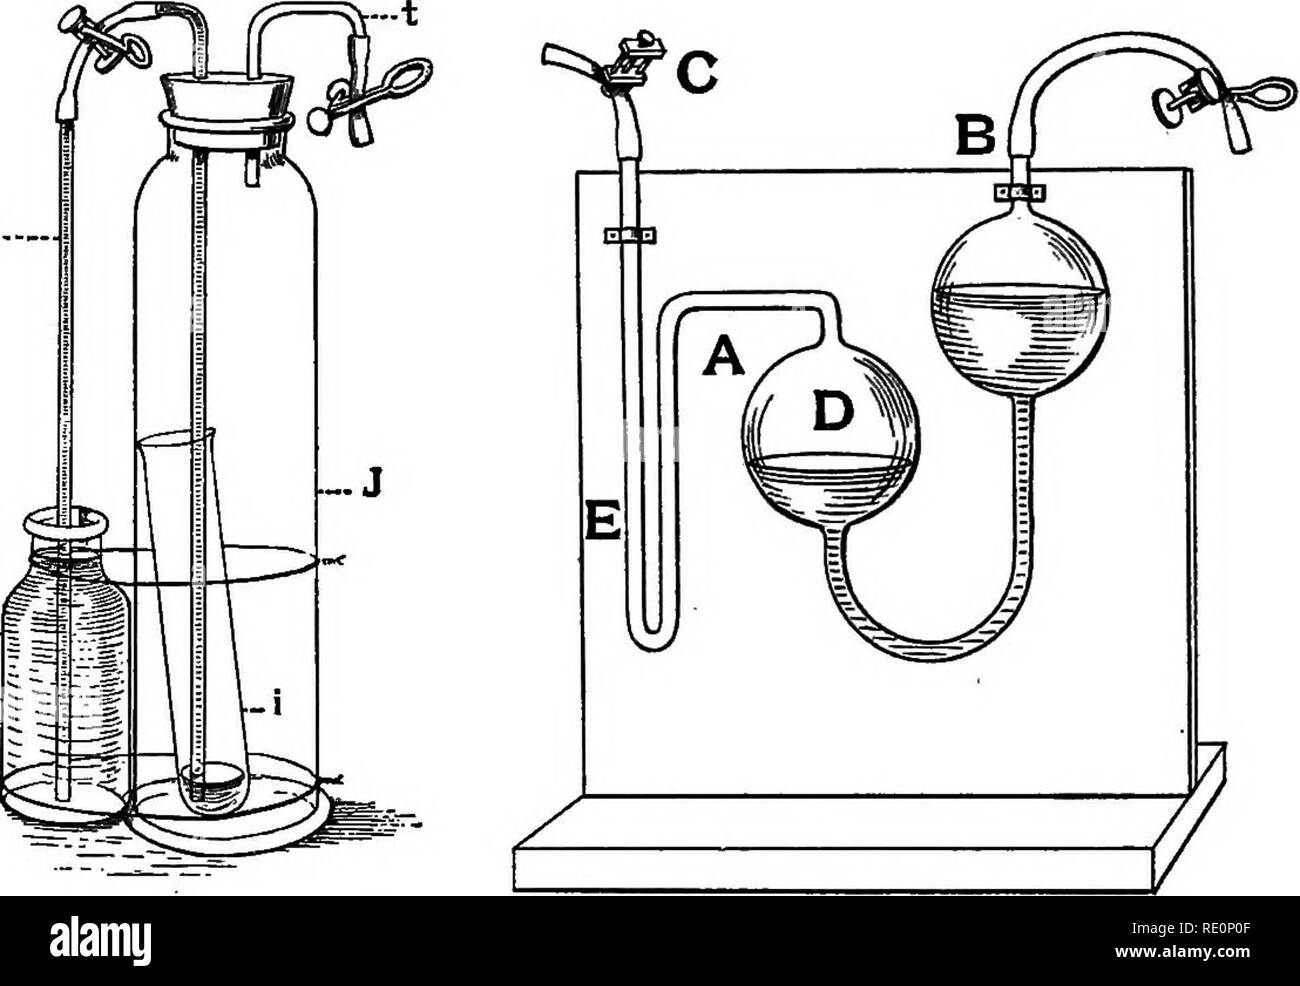 . Practical physiology of plants. Plant physiology; 1894. CH. II] ,GAS ANALYSIS. 39 tion purposes. The analysis is made in the following manner:—A strong KHO solution (1 in 2) is introduced into B (fig. 8) until its level reaches A, and then by blow- 1-... Fig. 7. Exp. 52. Fig. 8. Exp. 52. ing down B the KHO is forced up the fine tube B and into a thick-walled india-rubber tube connected with it. As soon as the solution appears at the open end of the tube, the clamp G is closed. The tubes G and F (fig. 9) of the measuring burette are then a little over ^ filled with water, care being taken tha Stock Photo